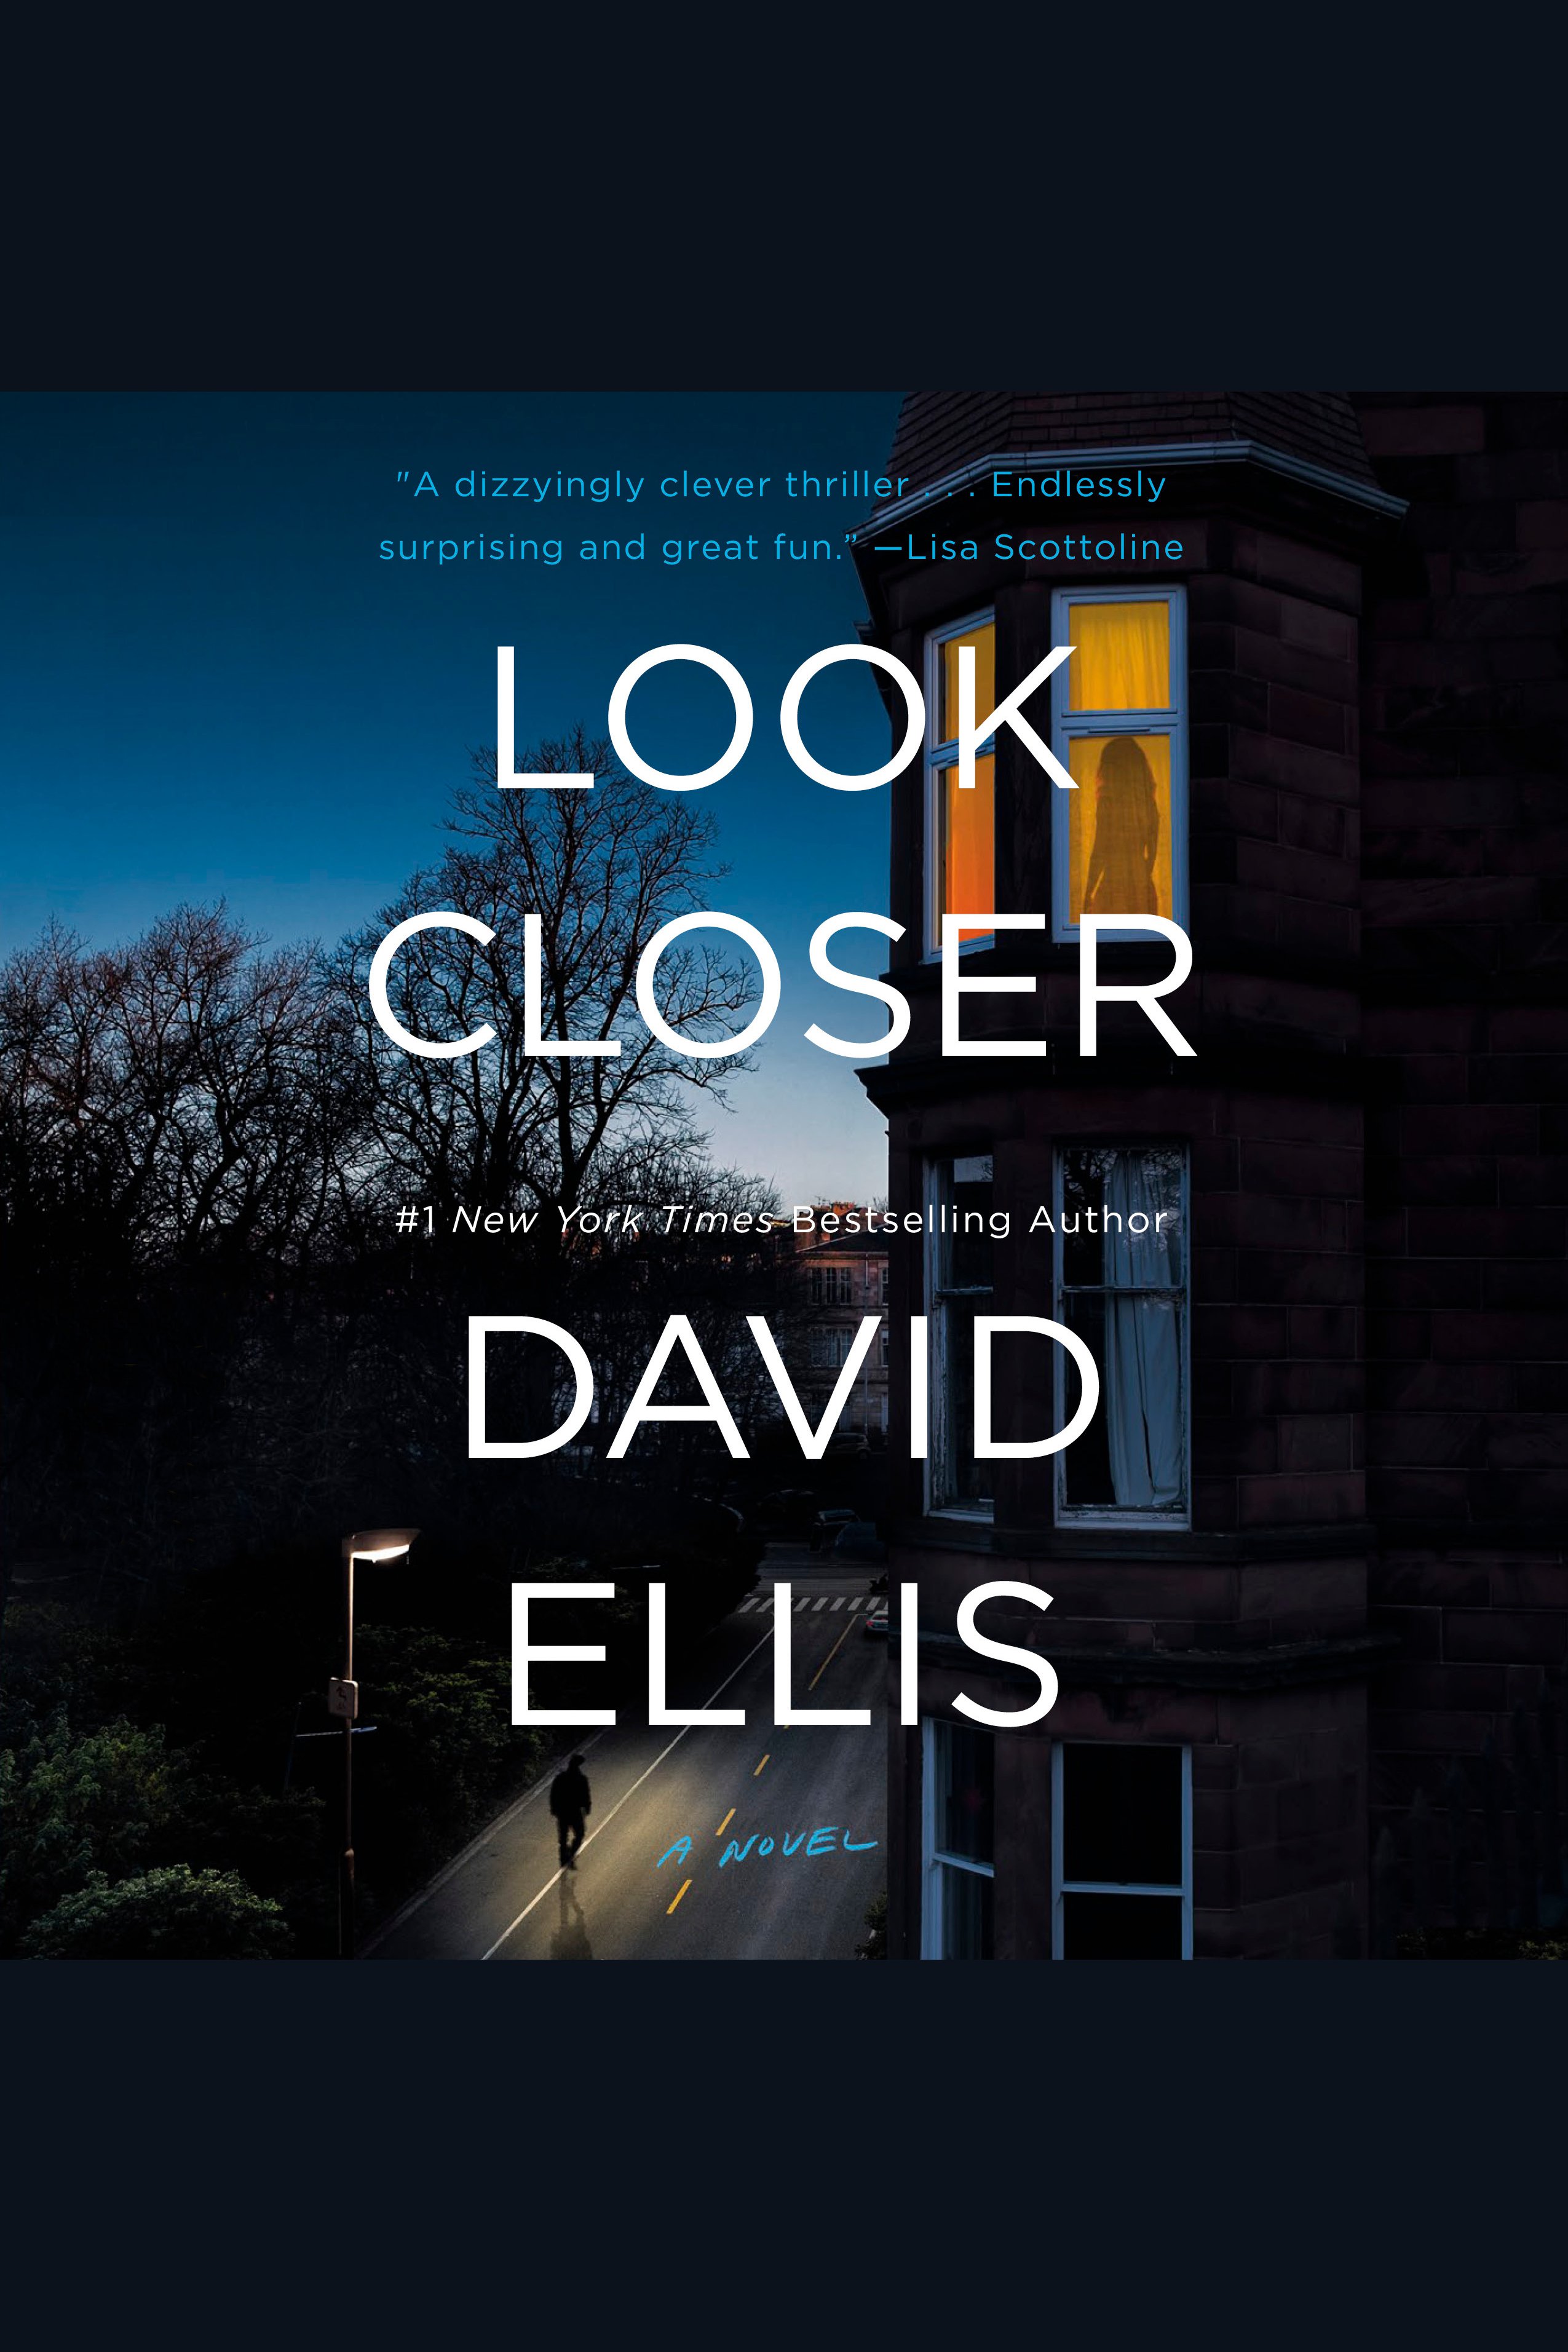 Look Closer cover image